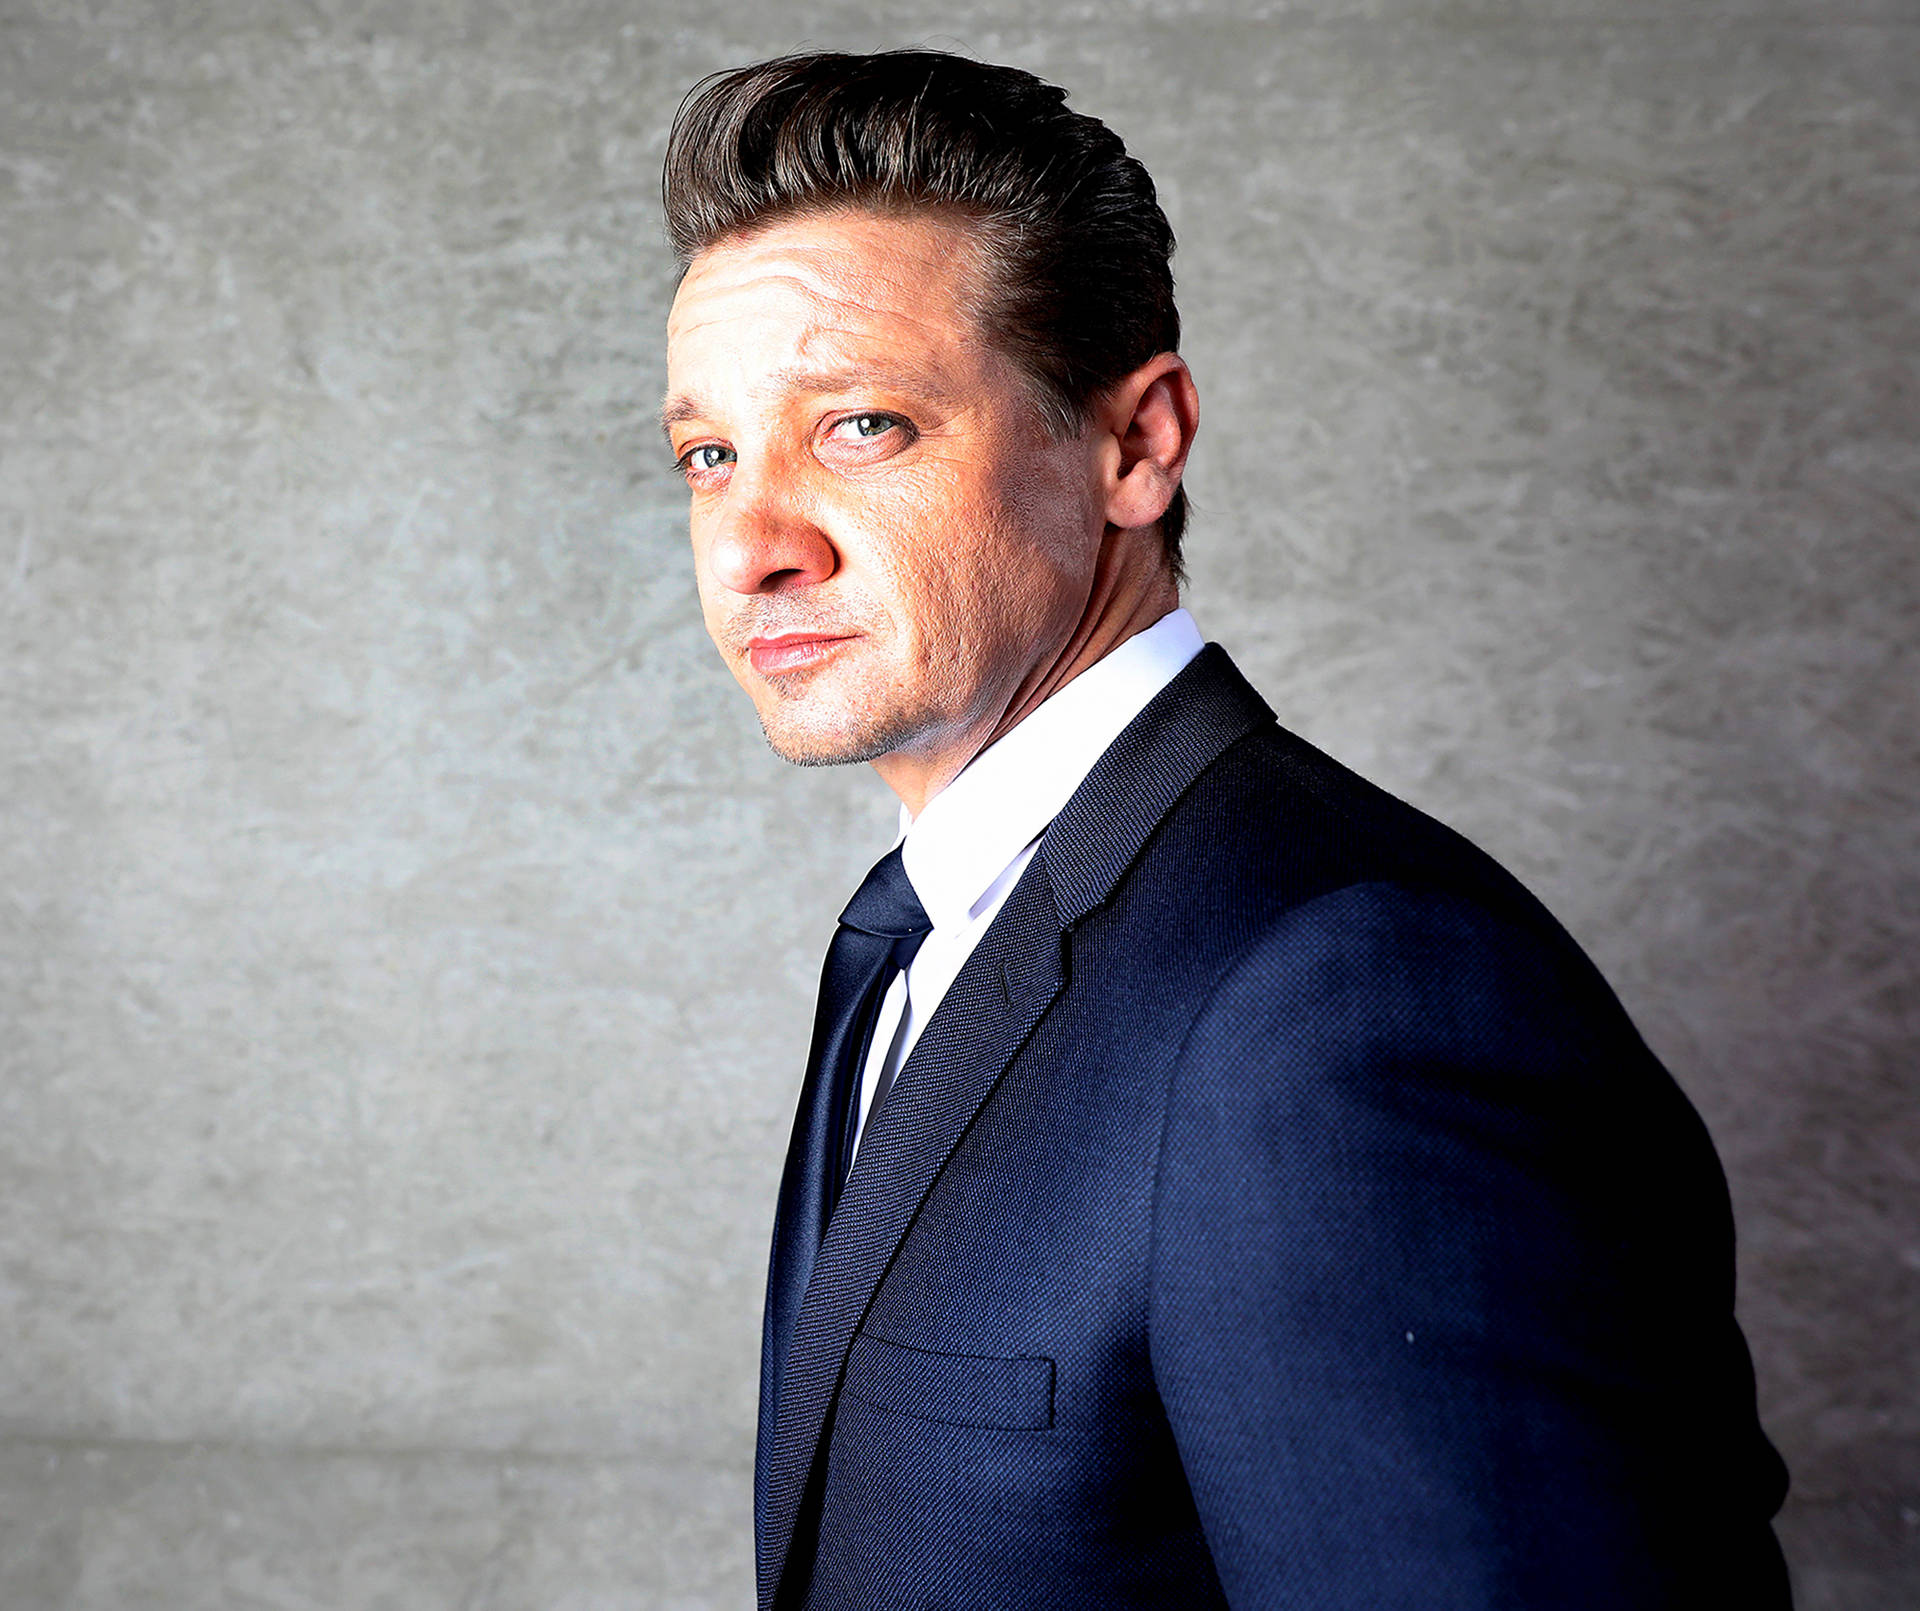 Fine Looking Jeremy Renner In Suit Background